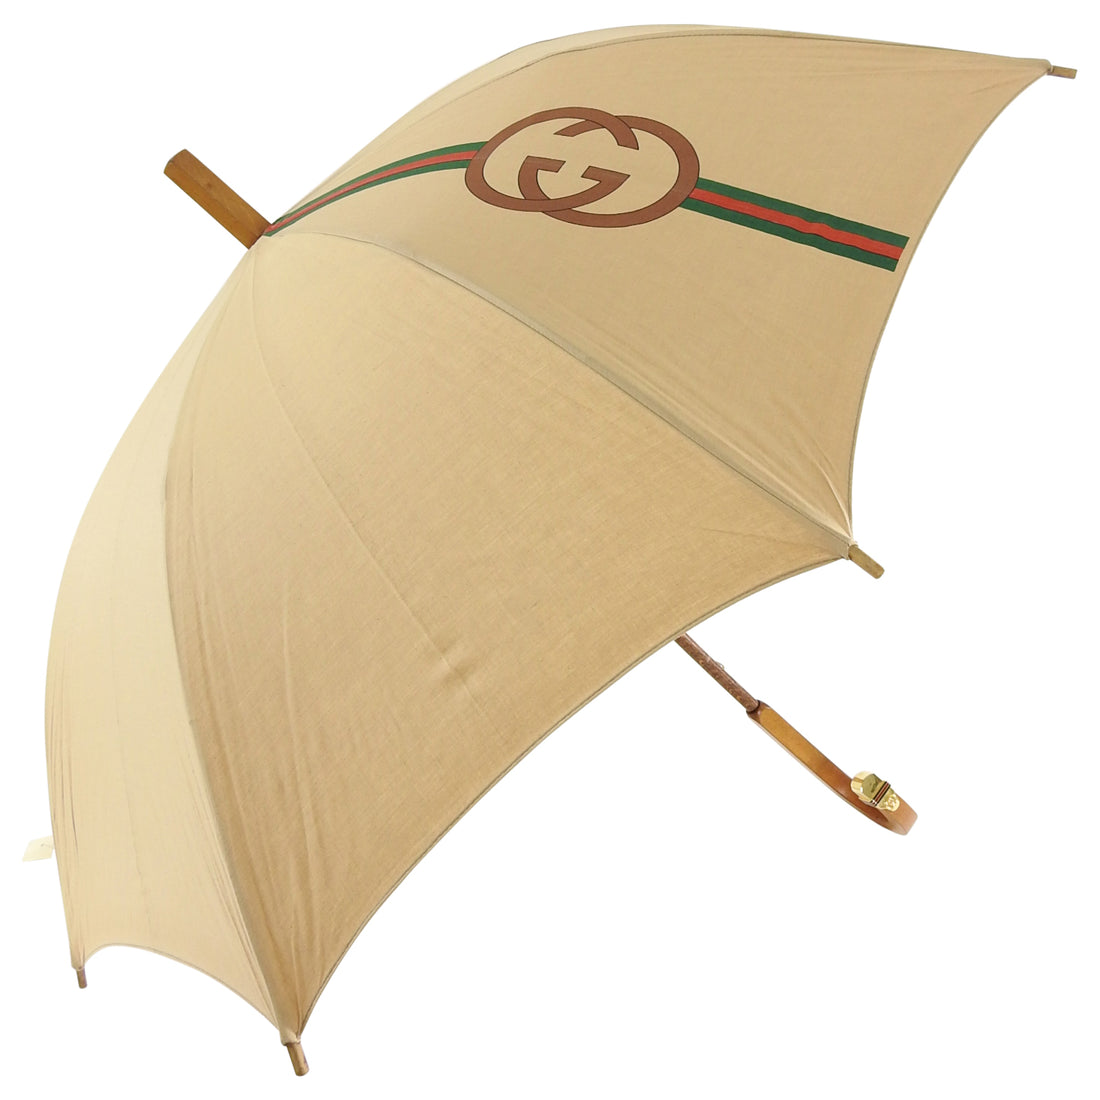 Gucci Vintage 1981 GG Logo Wood Handle Umbrella in box - New with Tags